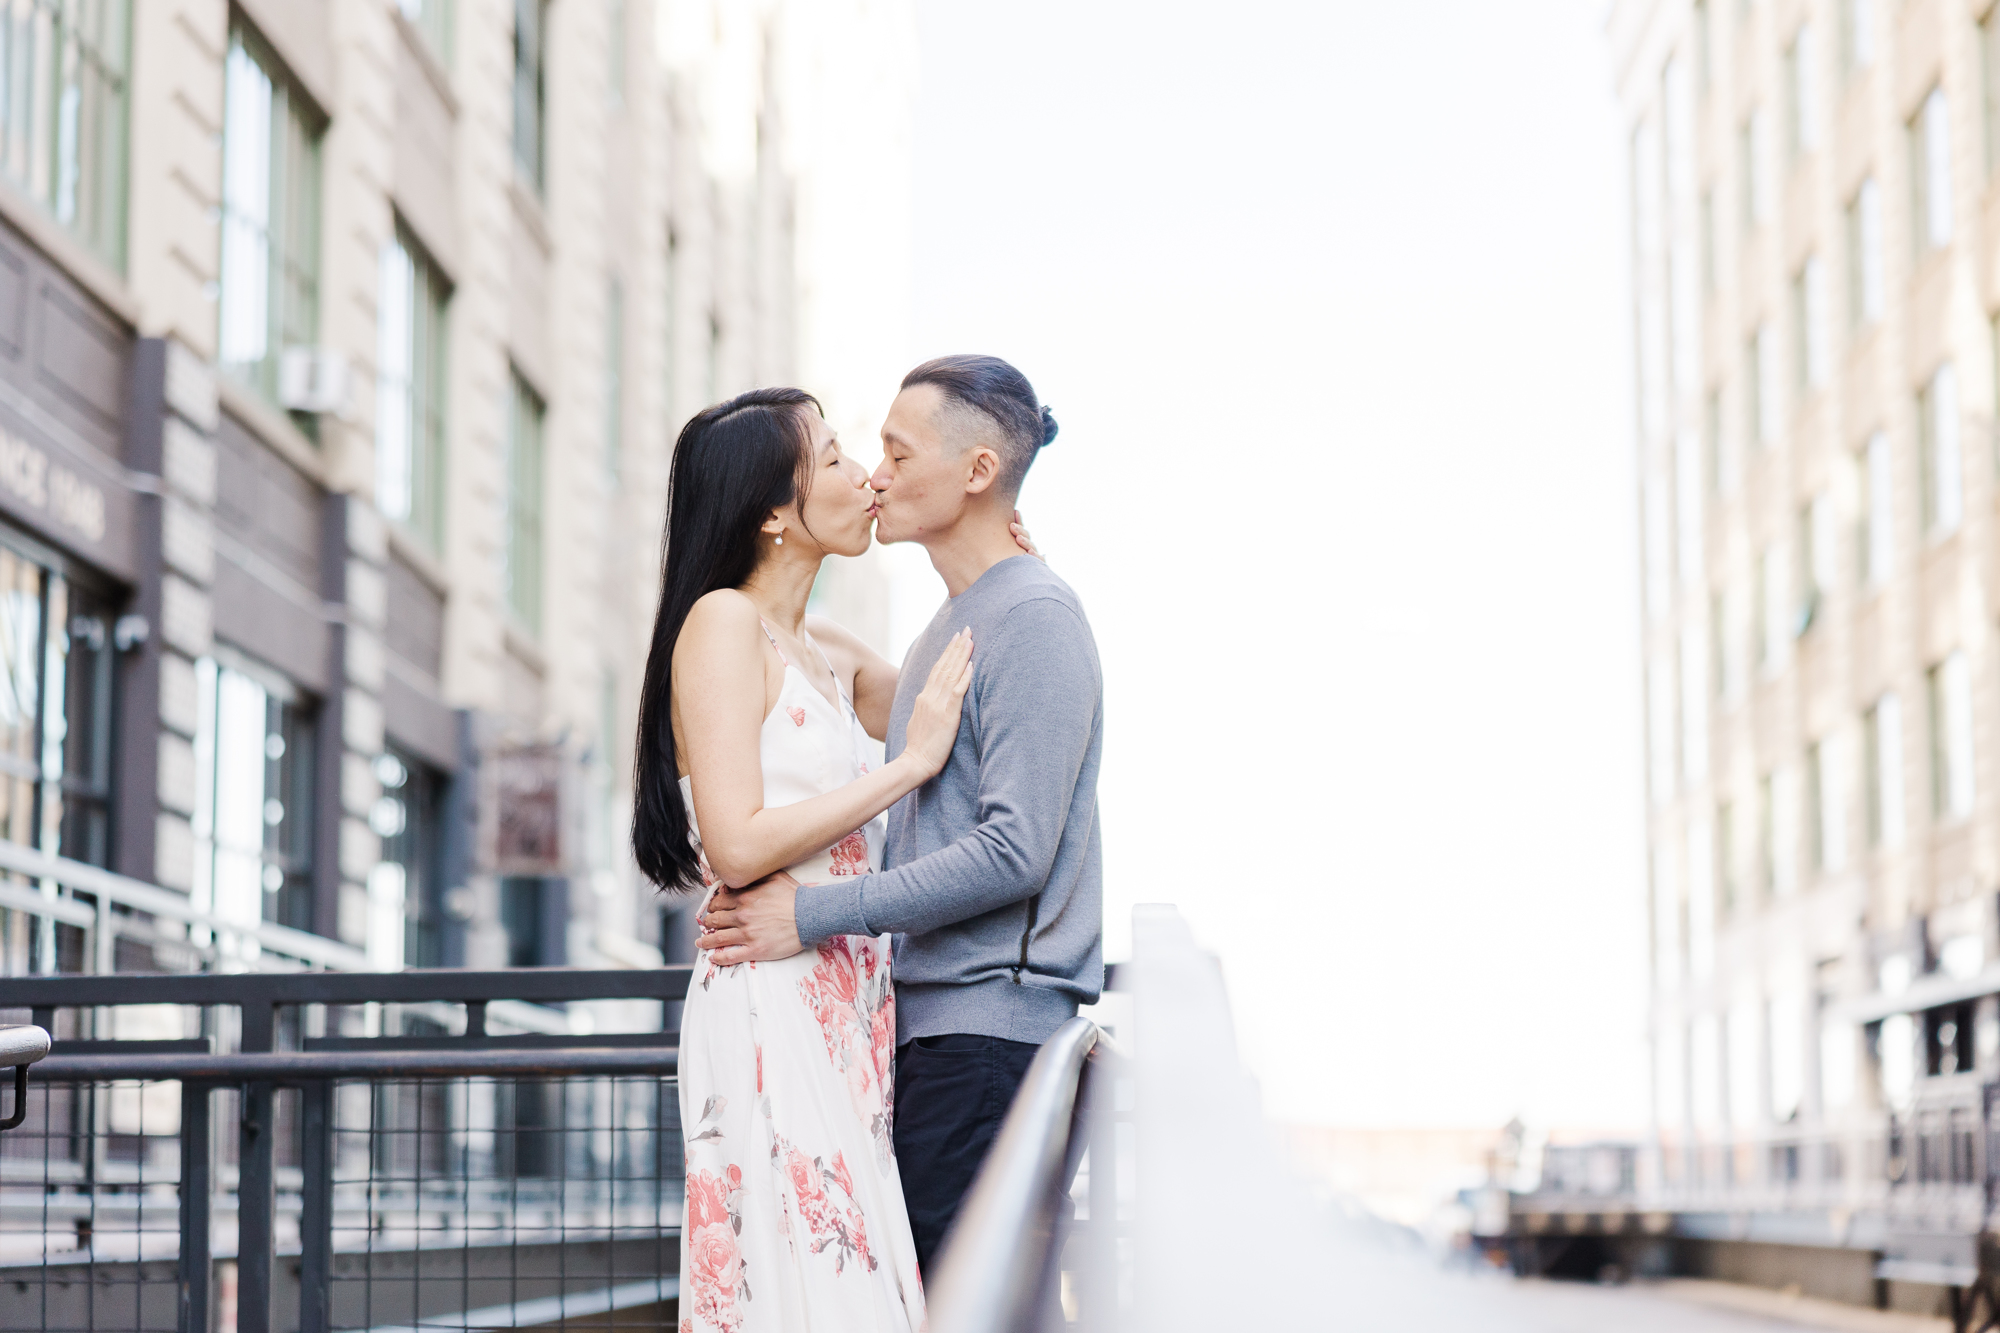 Beautiful Brooklyn Engagement Photos in Industry City